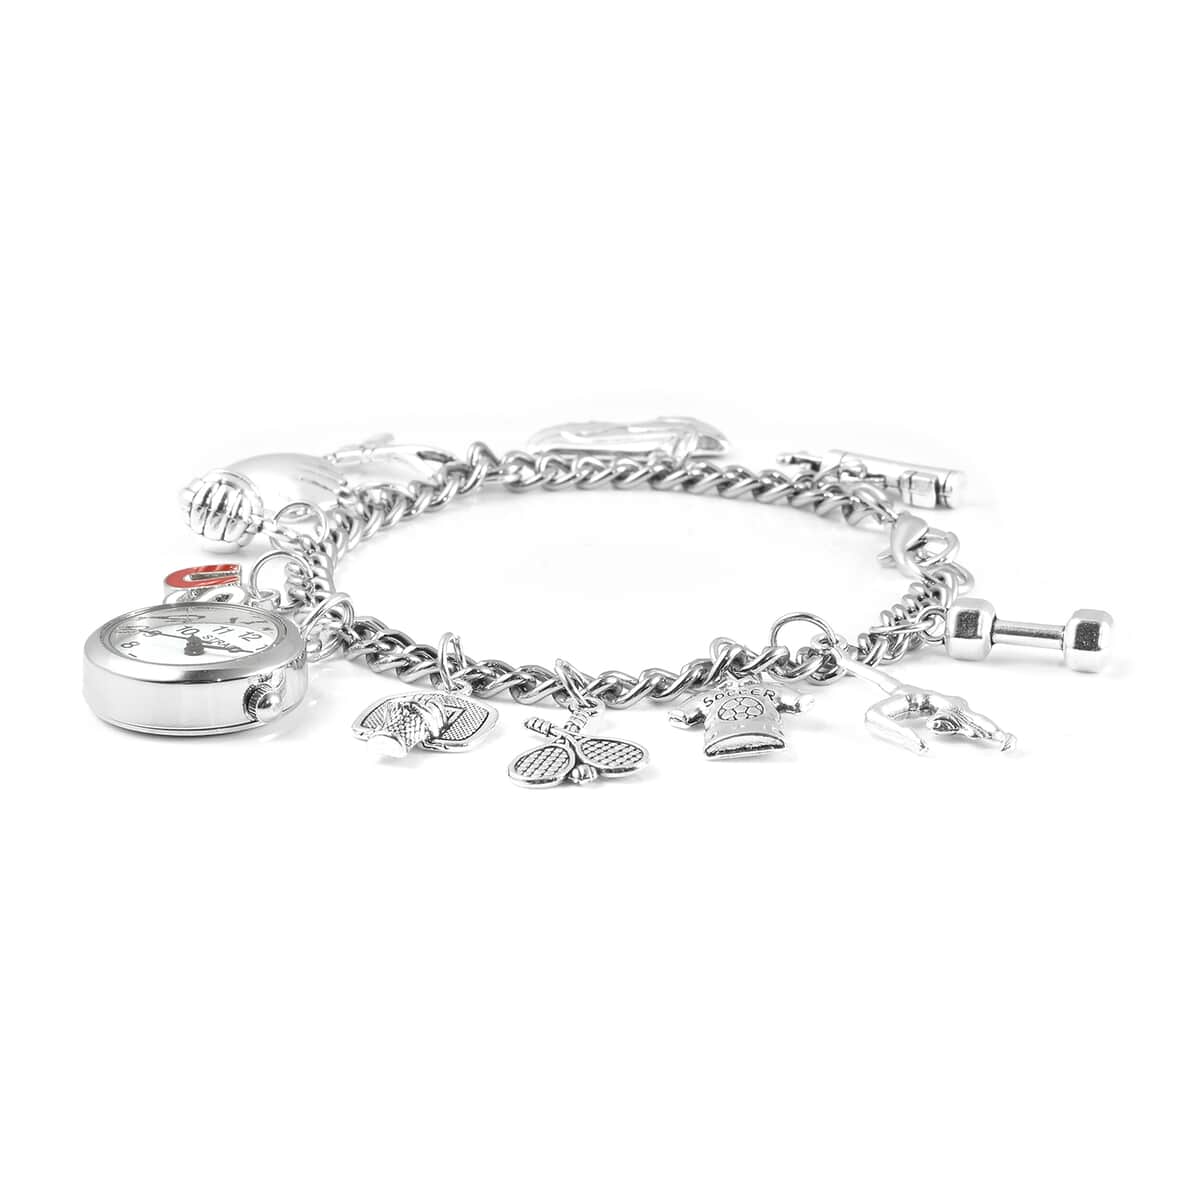 Strada Japanese Movement USA Sports Charm Bracelet Watch (up to 8.5 inches) image number 2